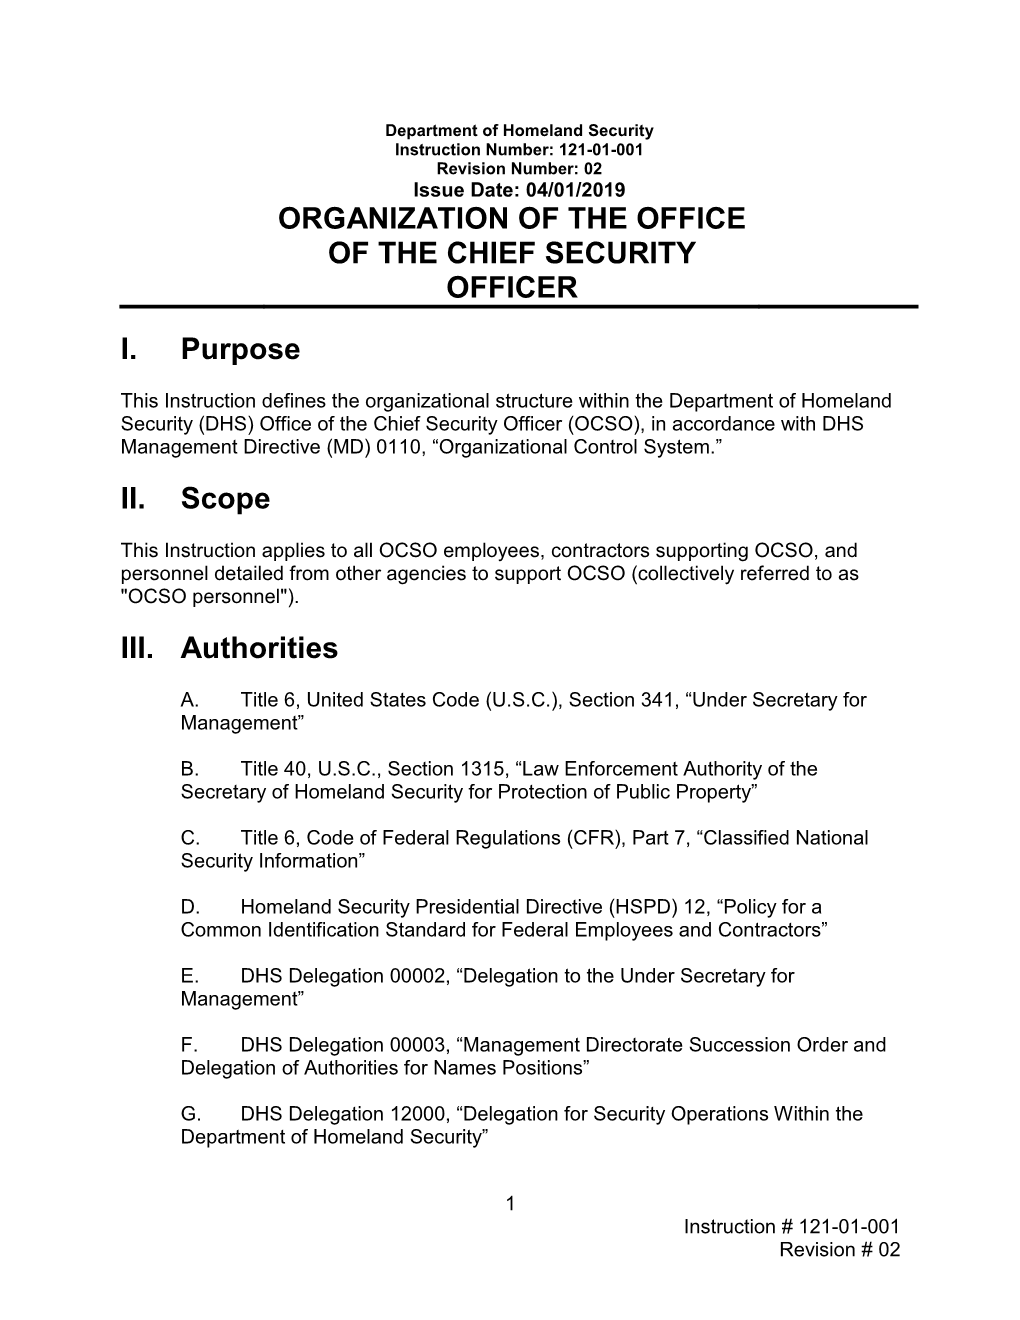 Organization of the Office of the Chief Security Officer